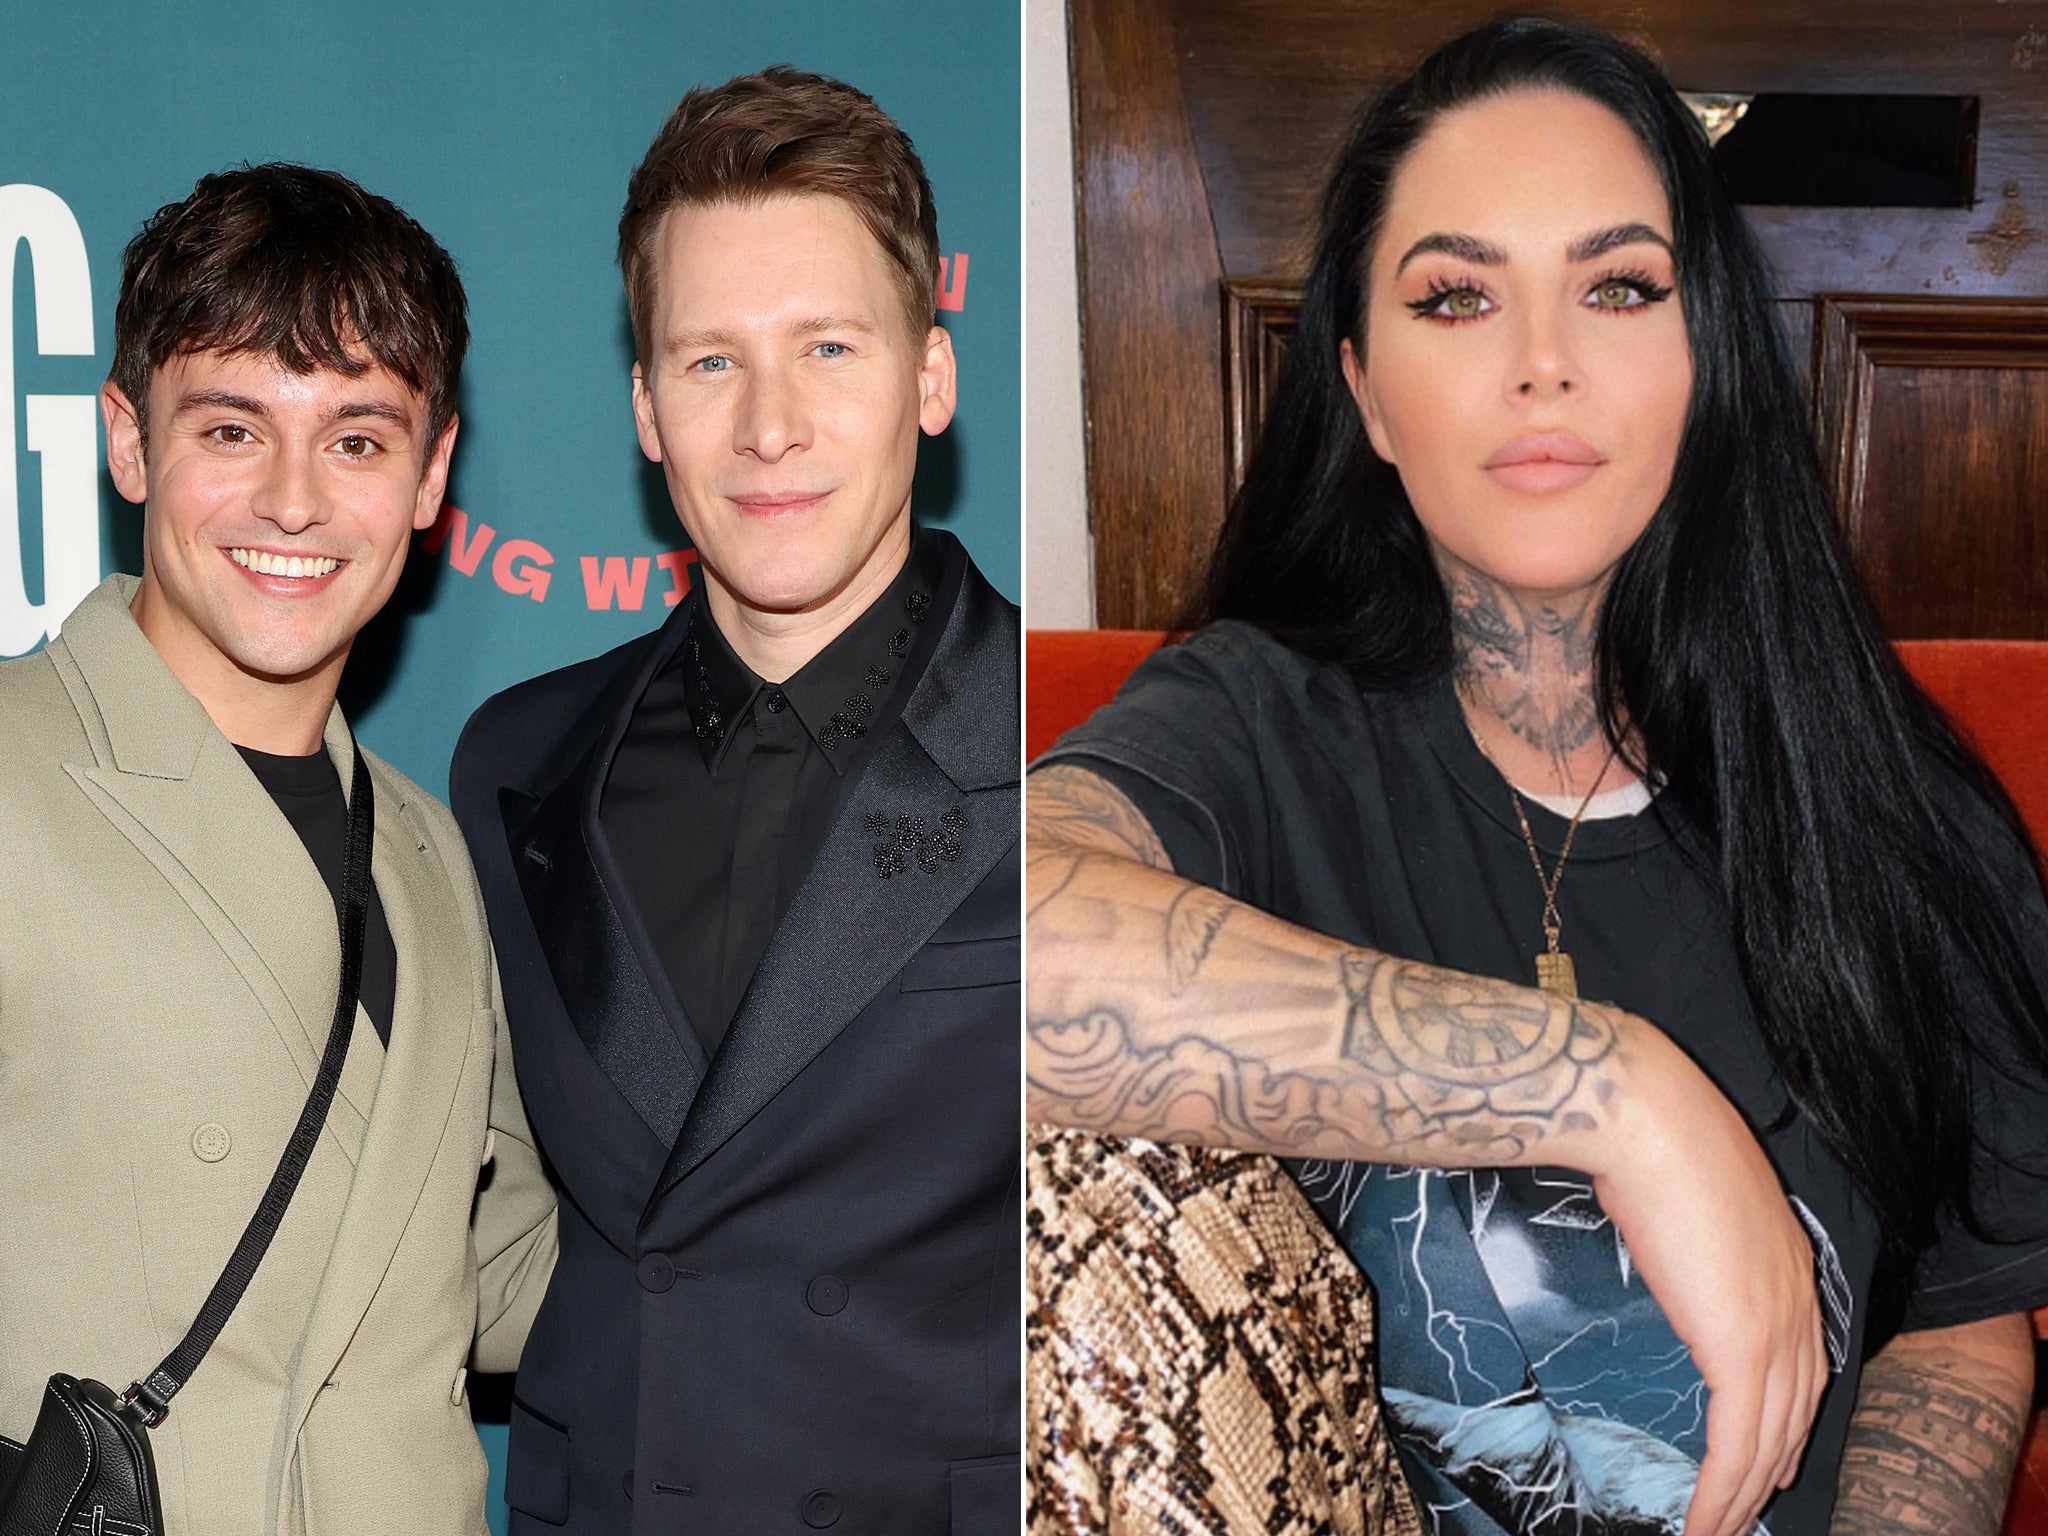 Teddy Edwardes claims Dustin Lance Black threw a drink over her and she responded with “a little tap on the head”